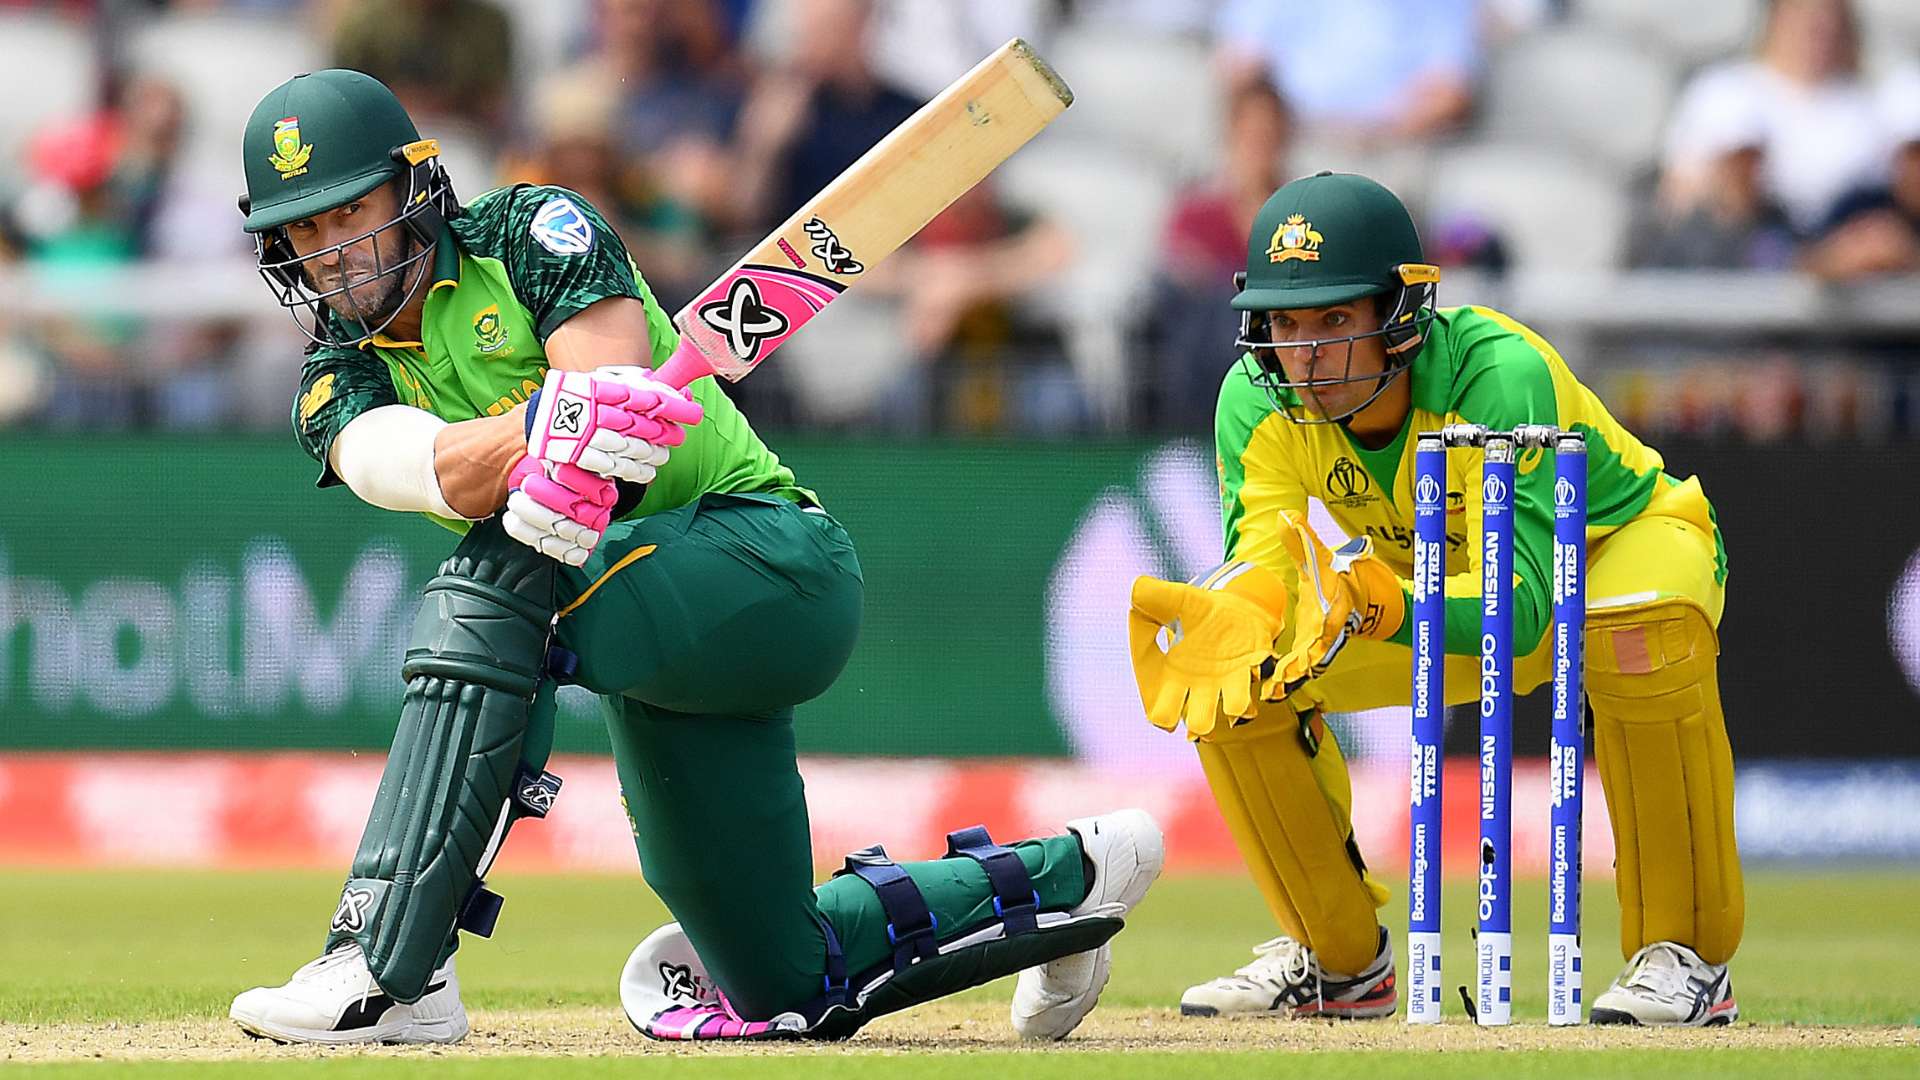 Australia v South Africa - ICC Cricket World Cup 2019